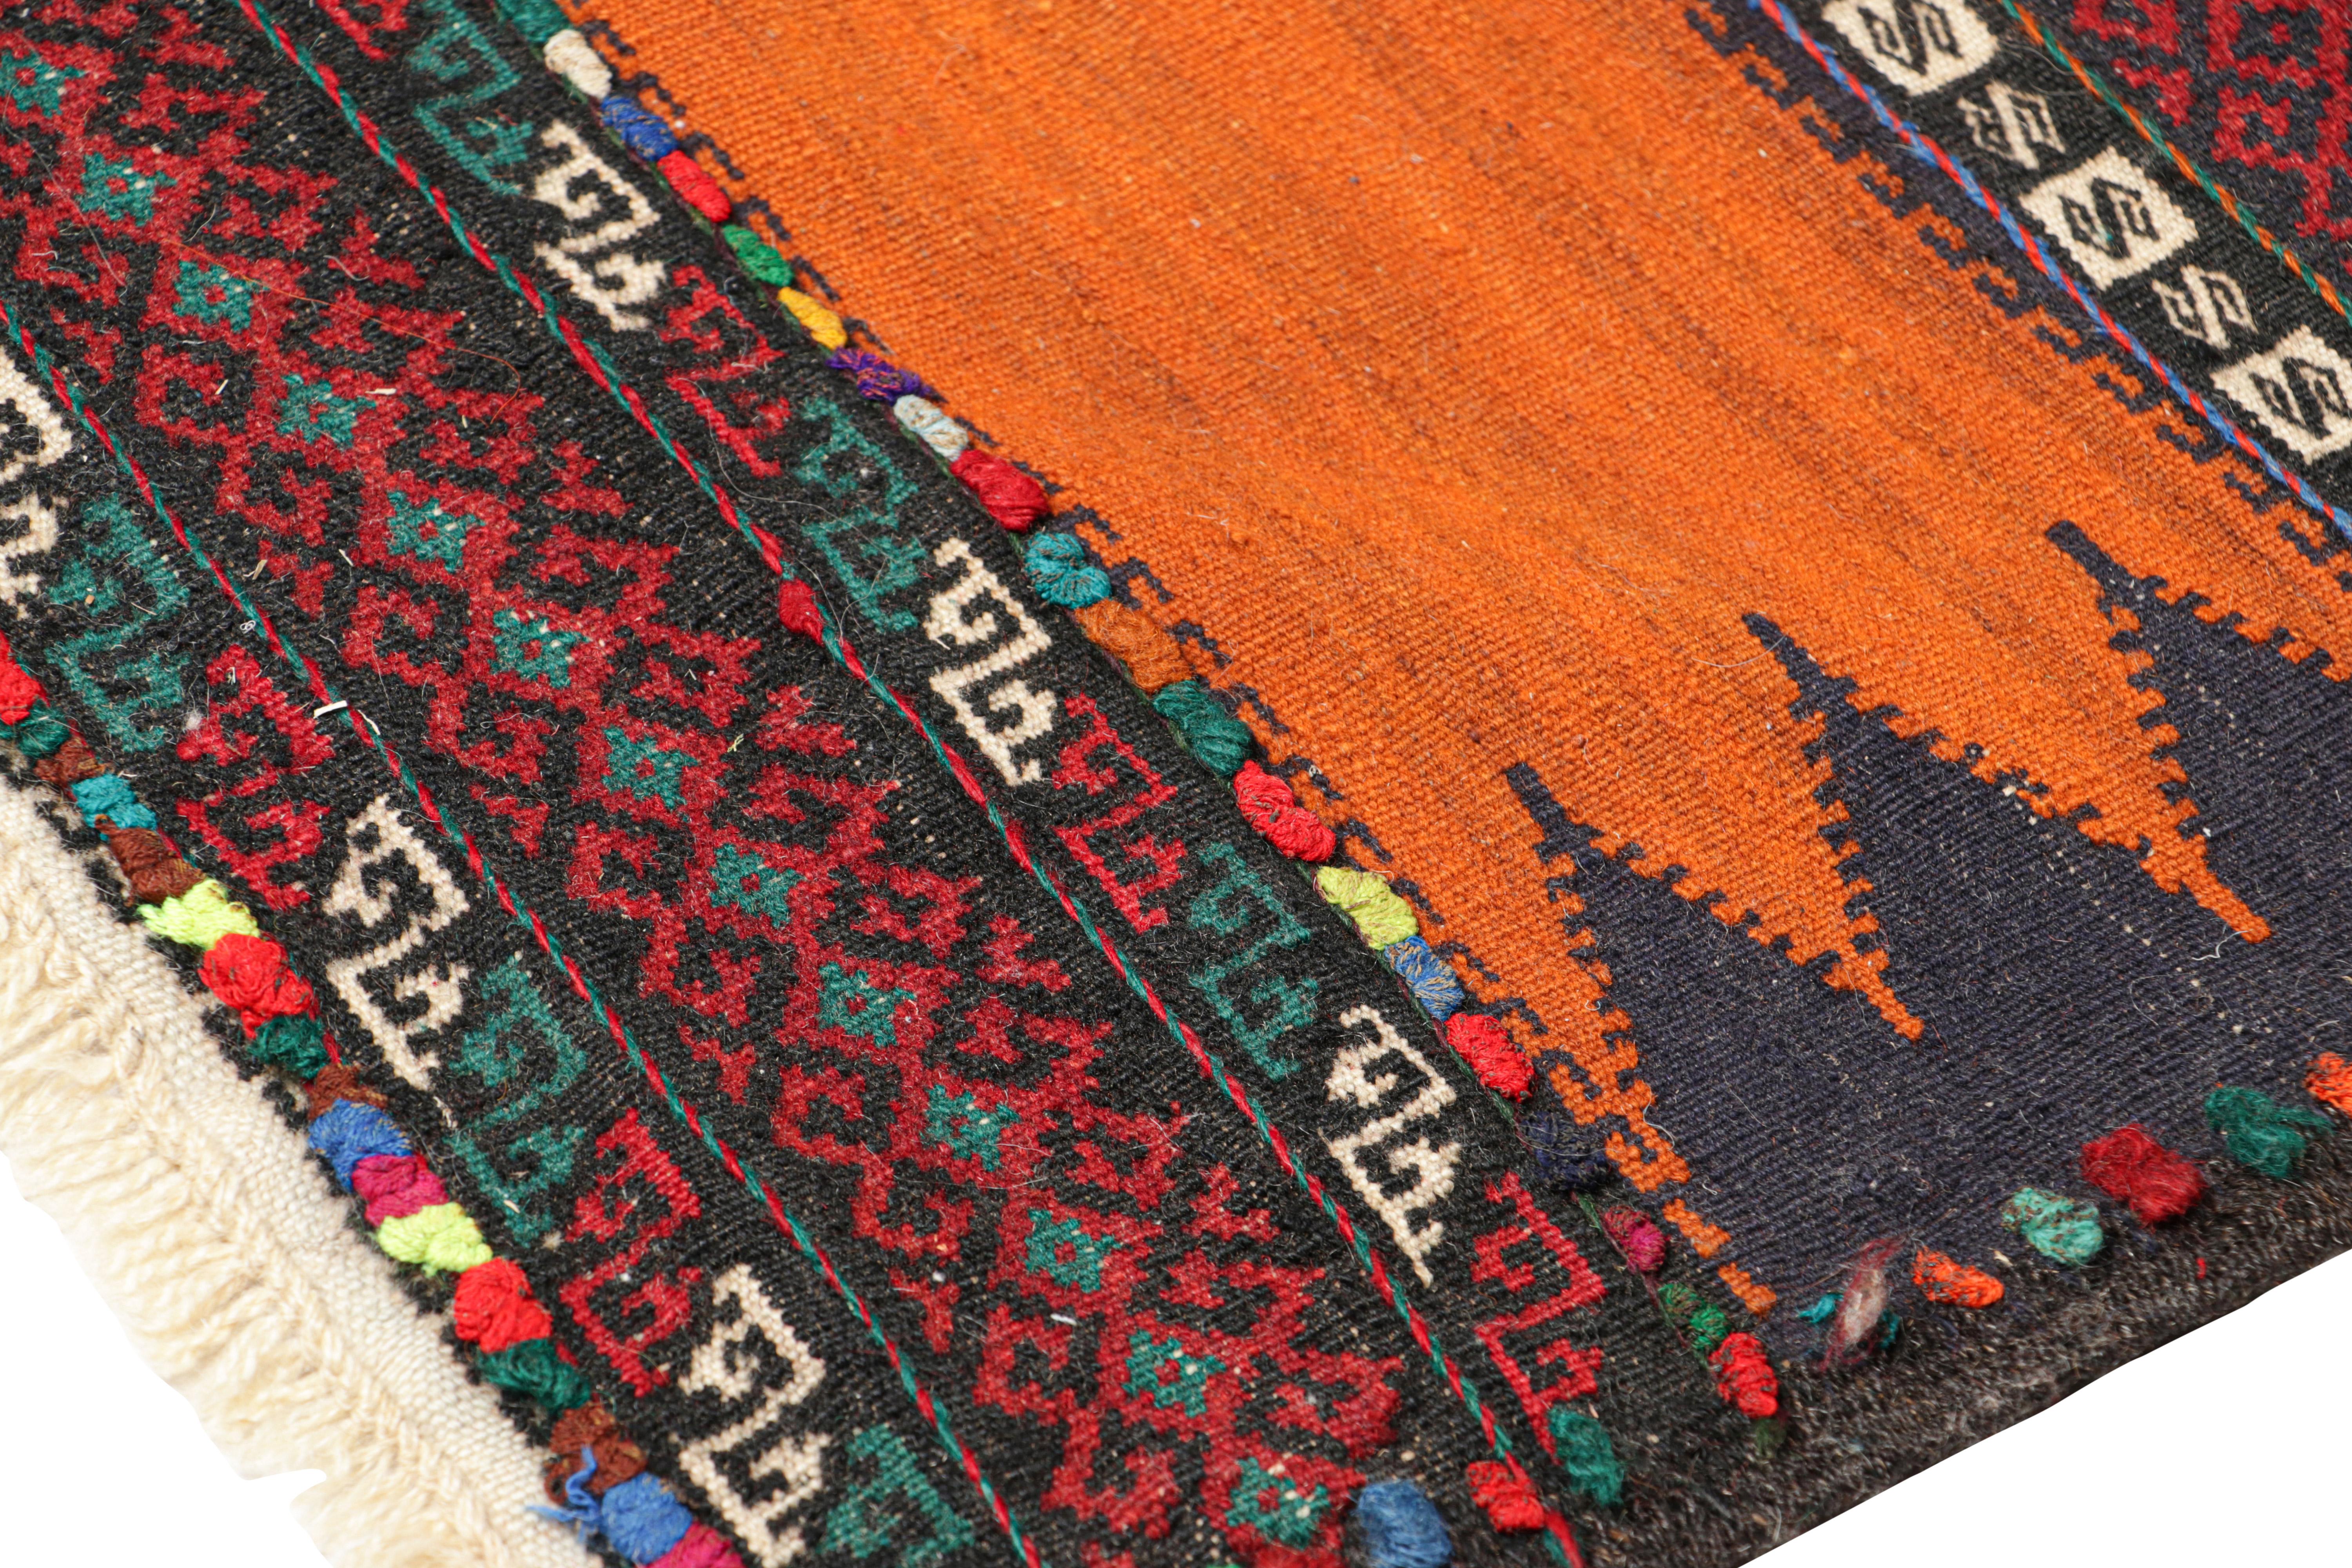 Hand-Woven Vintage Afghan Kilim Runner in Orange with Geometric Patterns, from Rug & Kilim For Sale